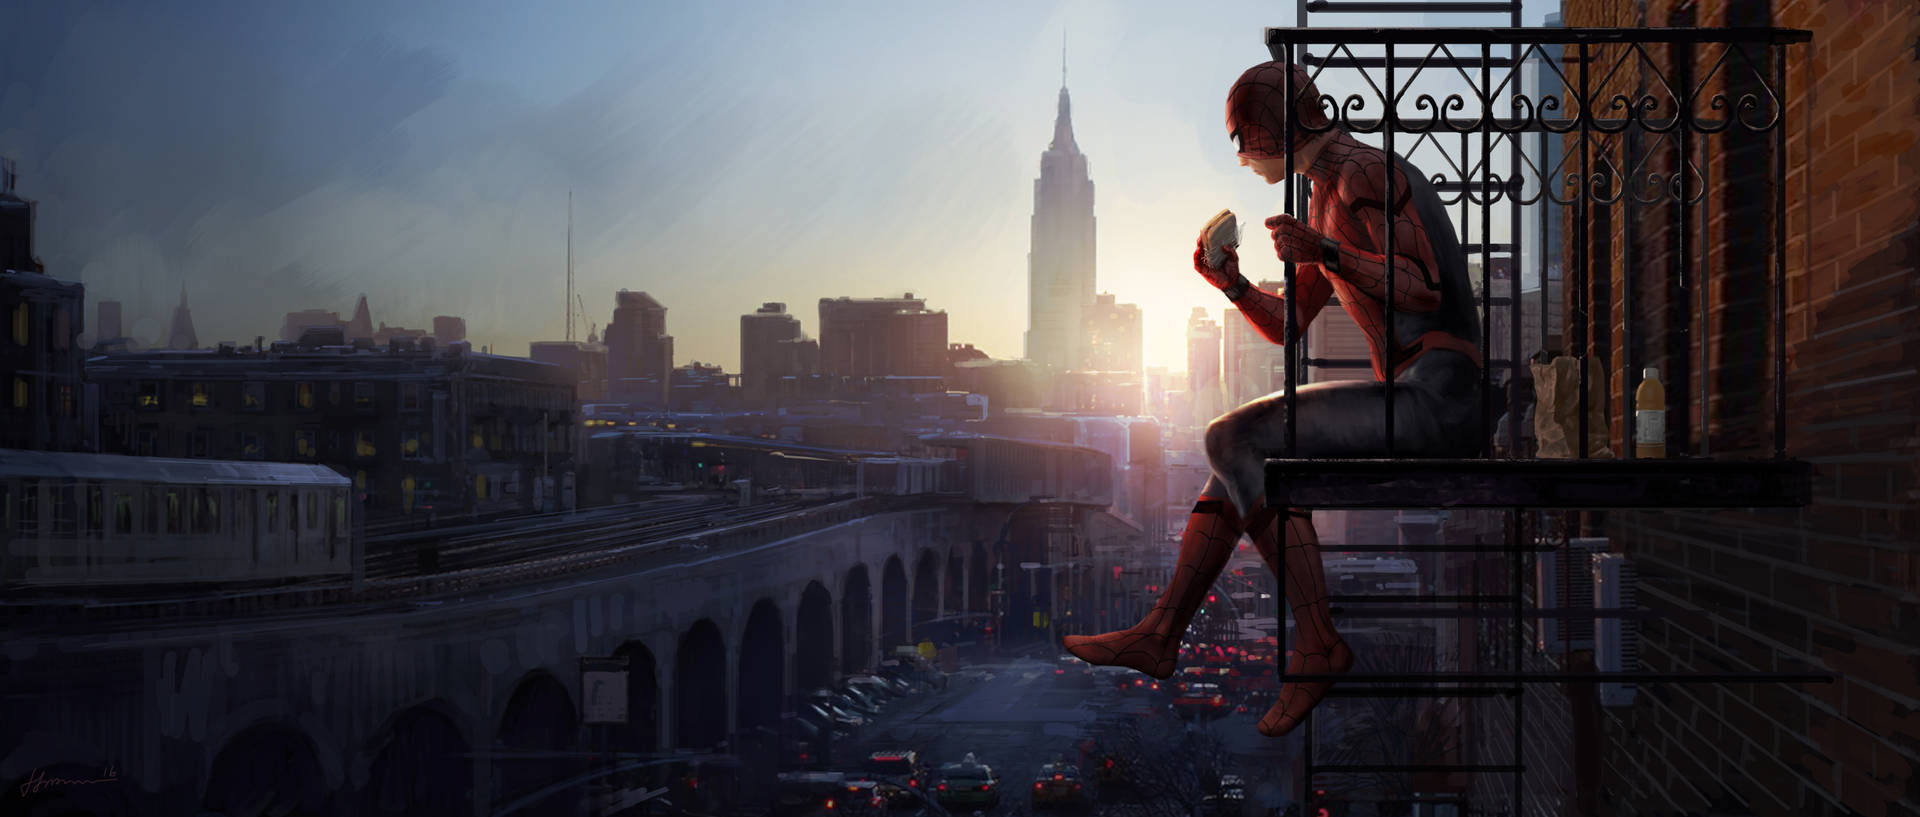 Peter Parker In NYC Wallpaper